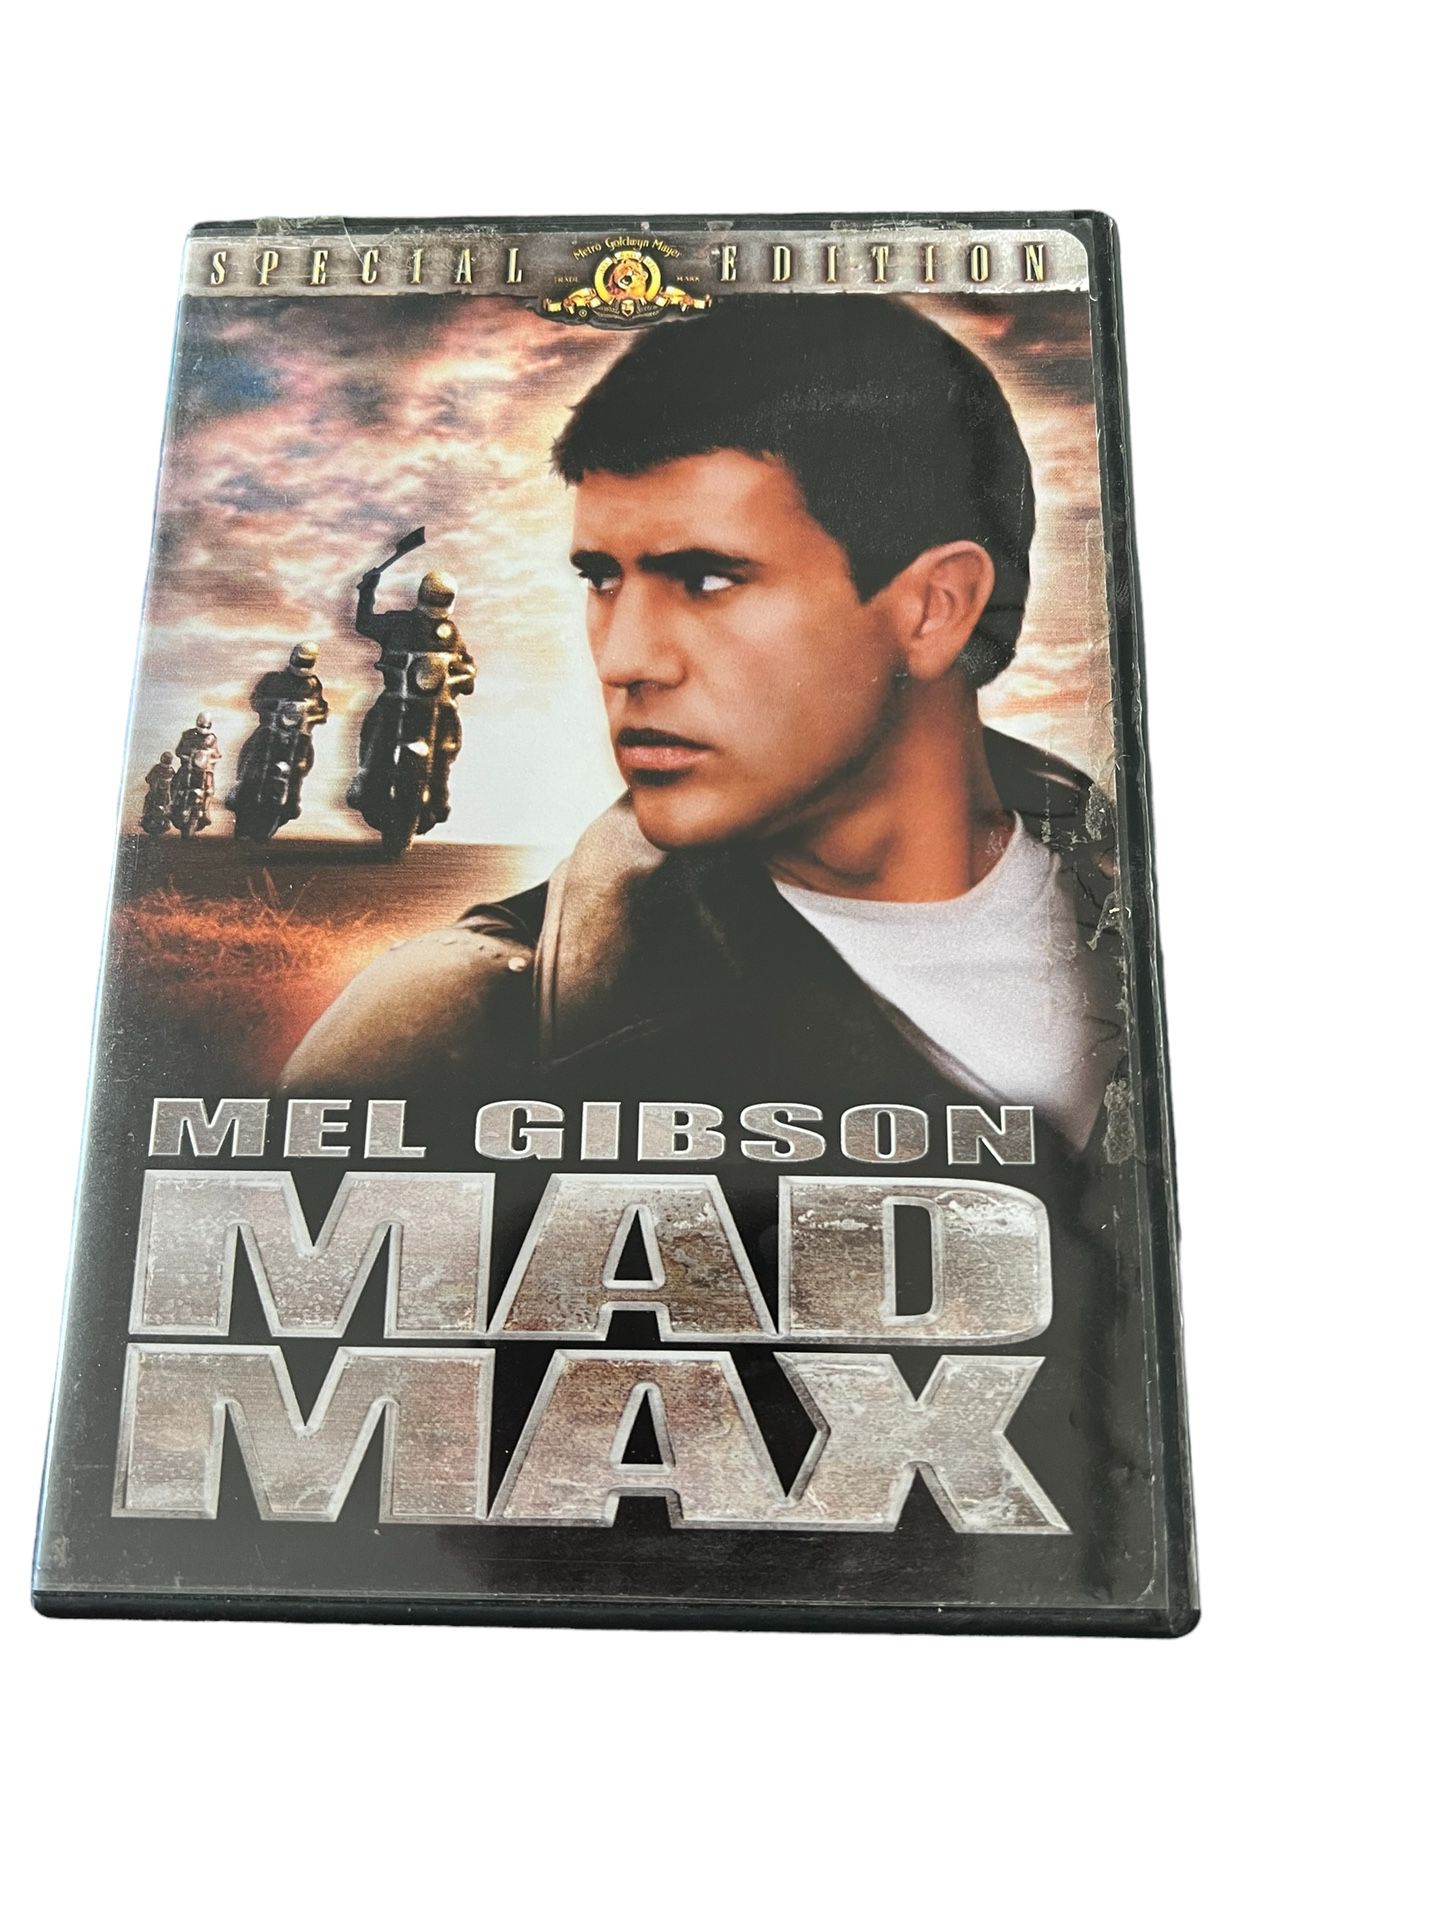 Mad Max (DVD, 2010, Special Edition With Summer Movie Cash)  This is a special edition DVD of the movie "Mad Max" starring Mel Gibson, directed by Geo